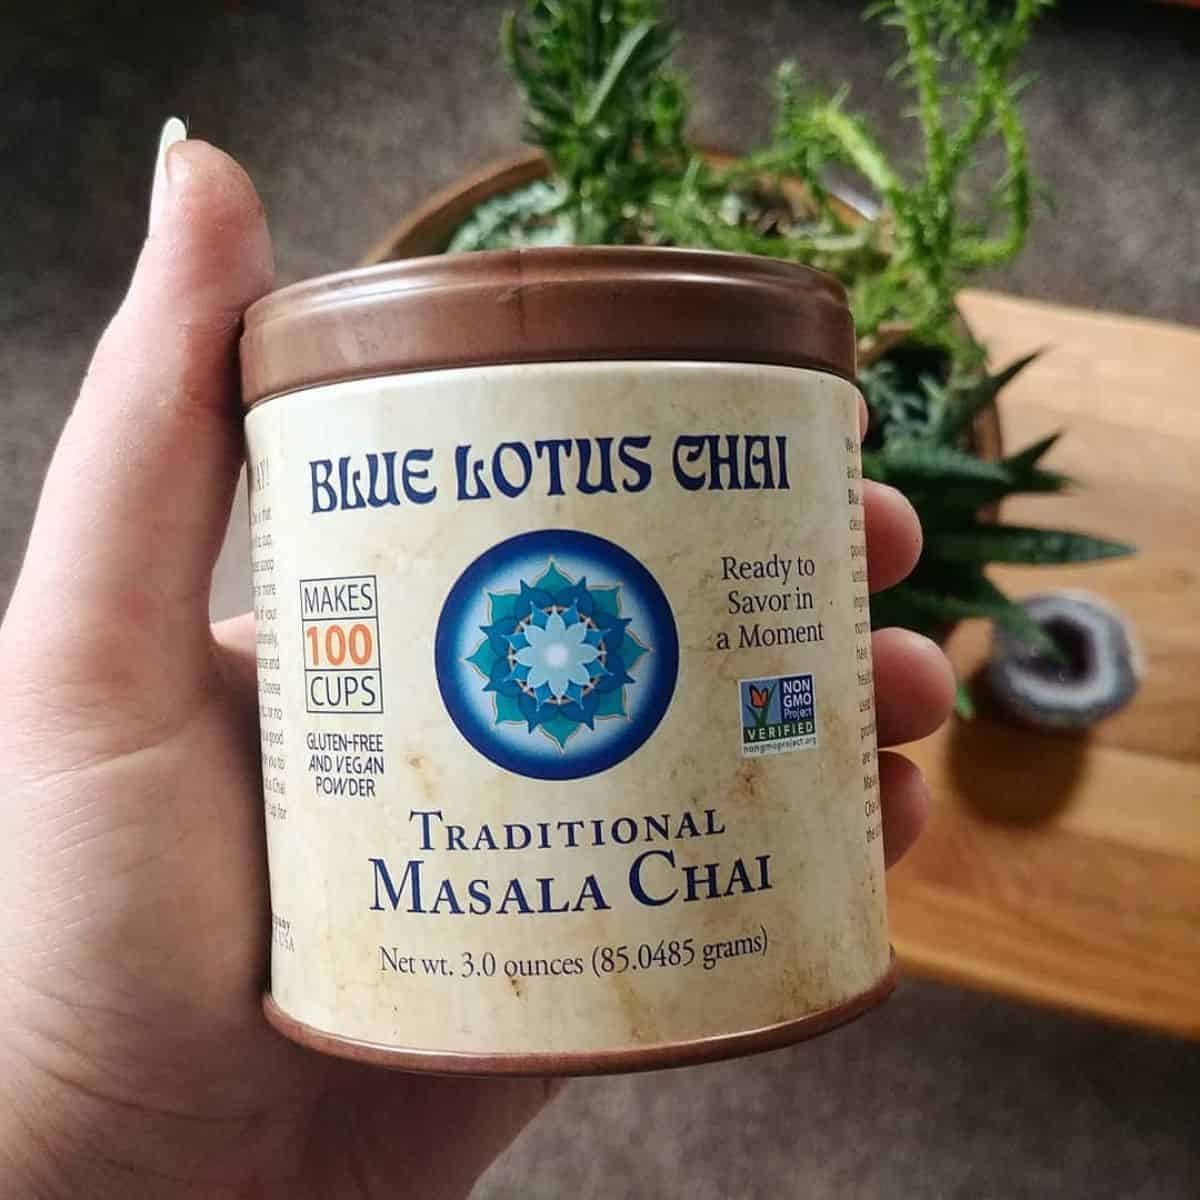 Masala Chai from a can of Blue Lotus Chai